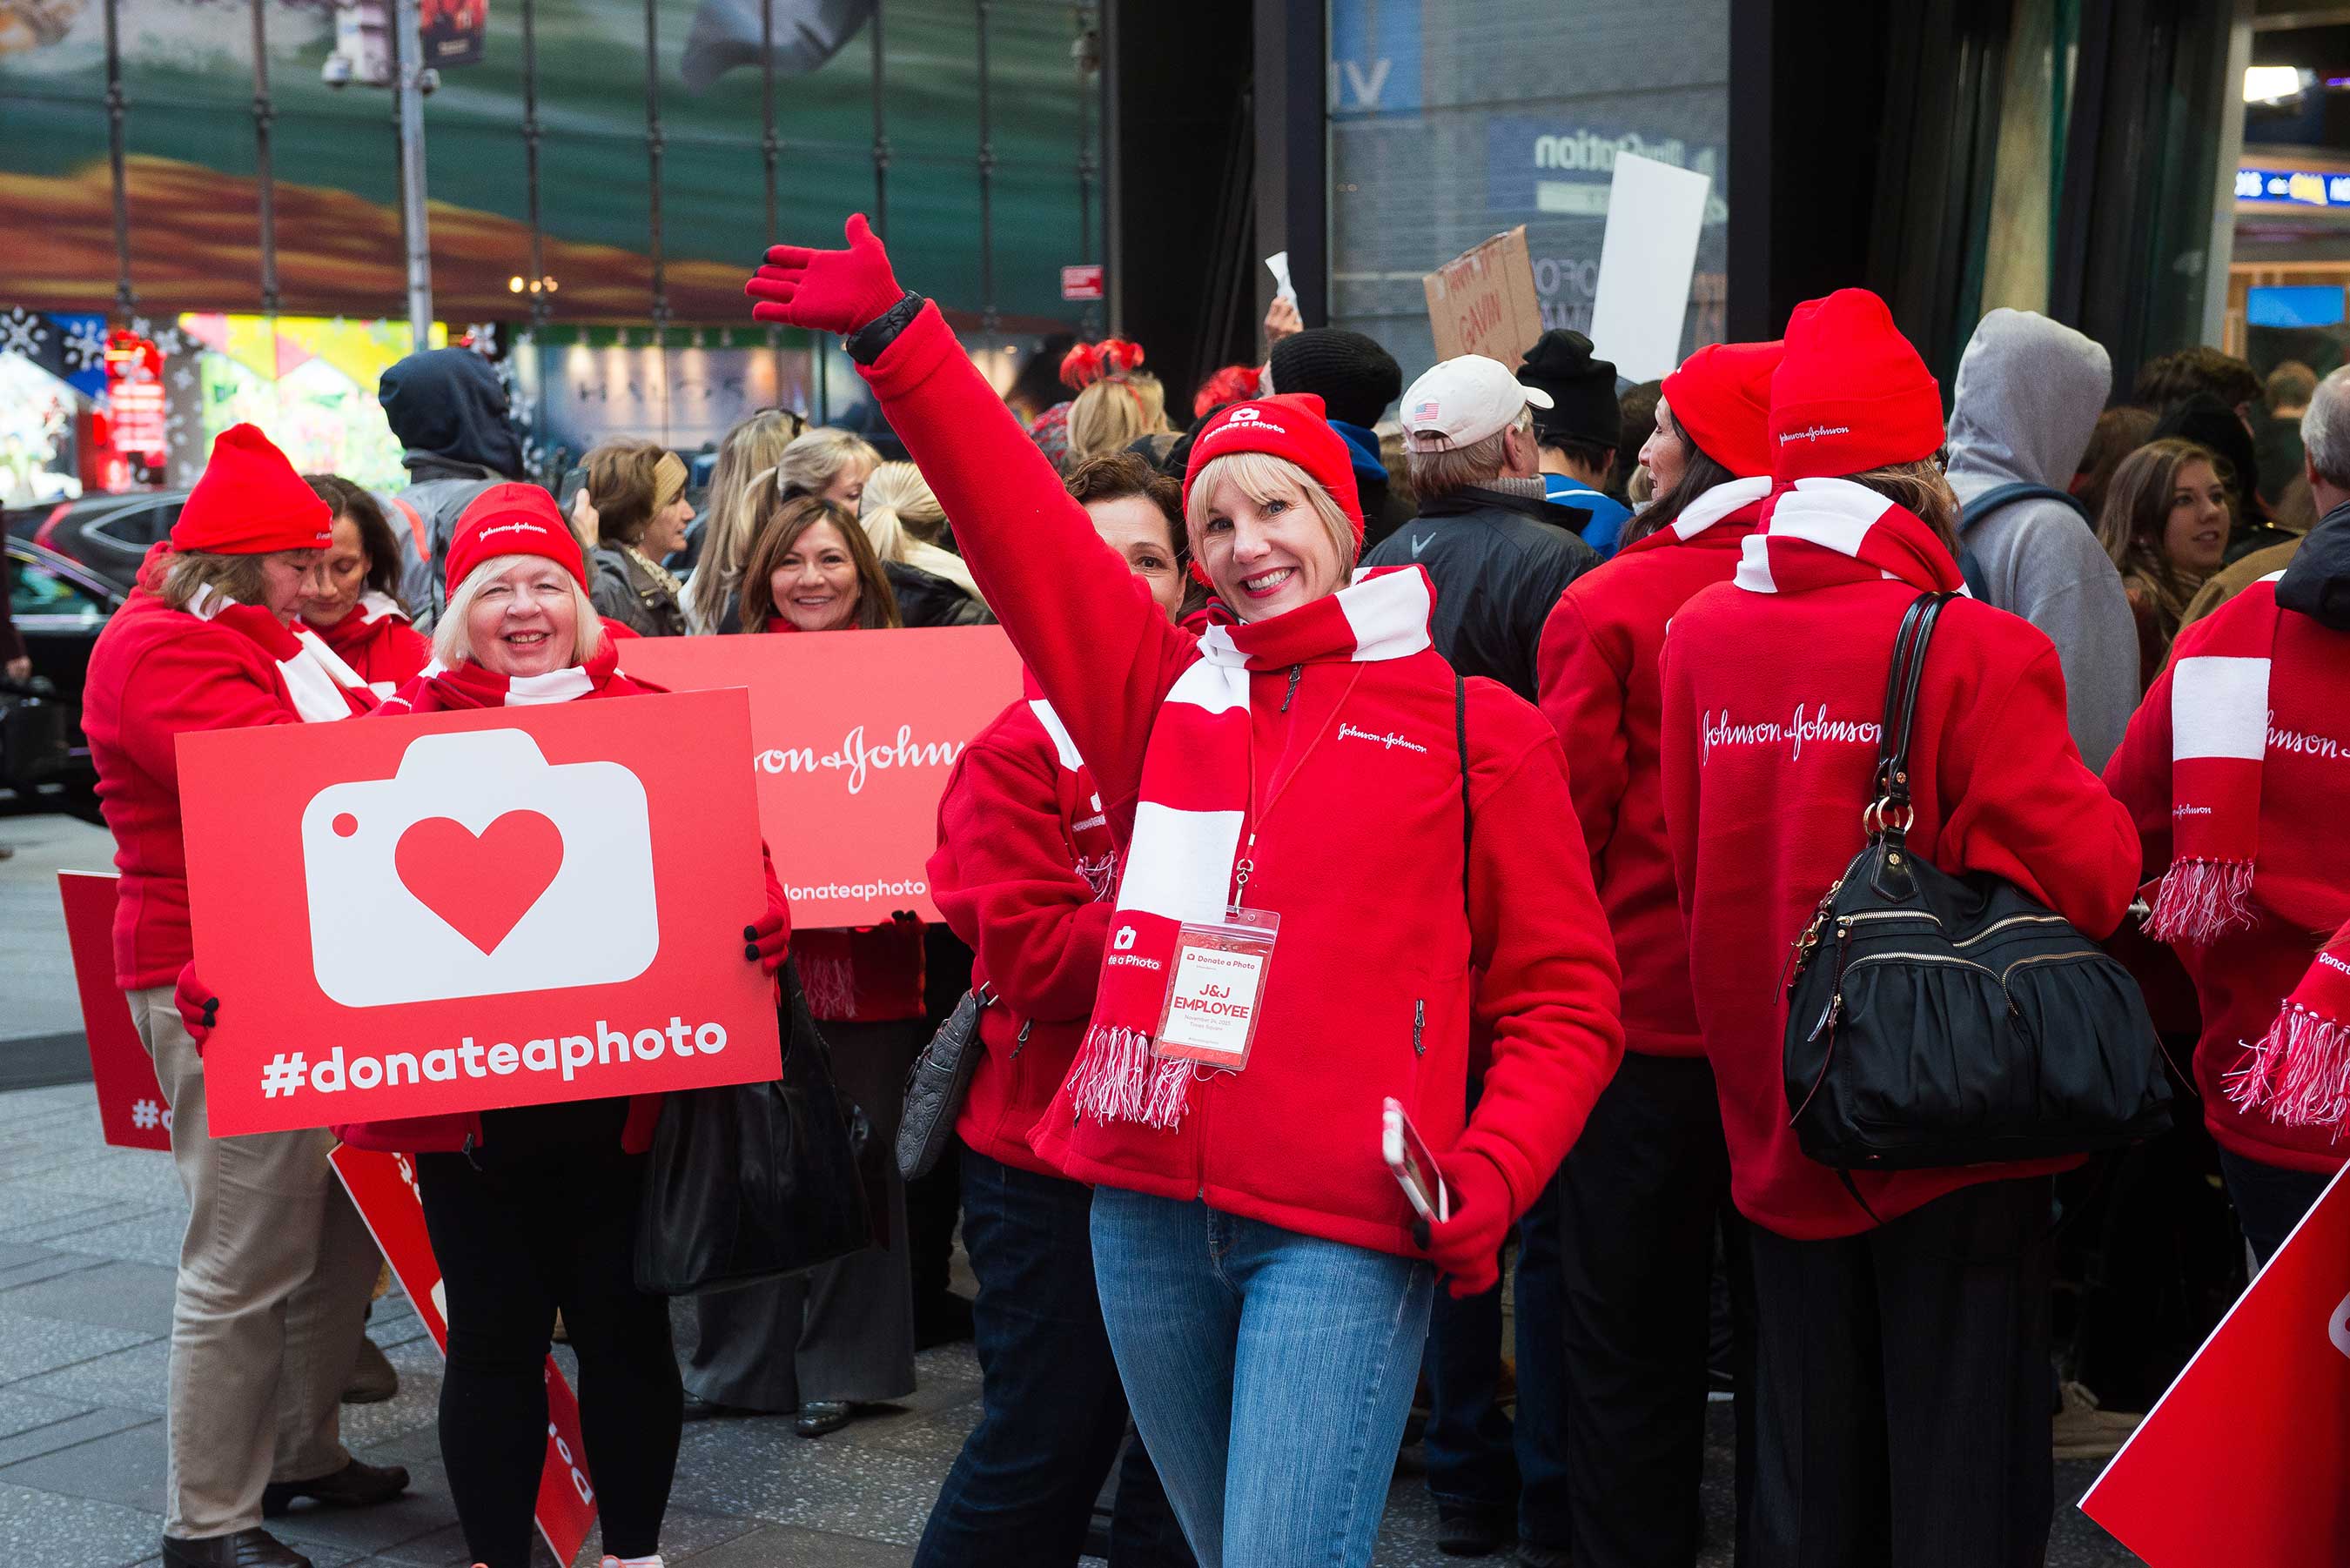 Johnson & Johnson kicks off the season of giving with Donate a Photo interactive giving experience in Times Square.